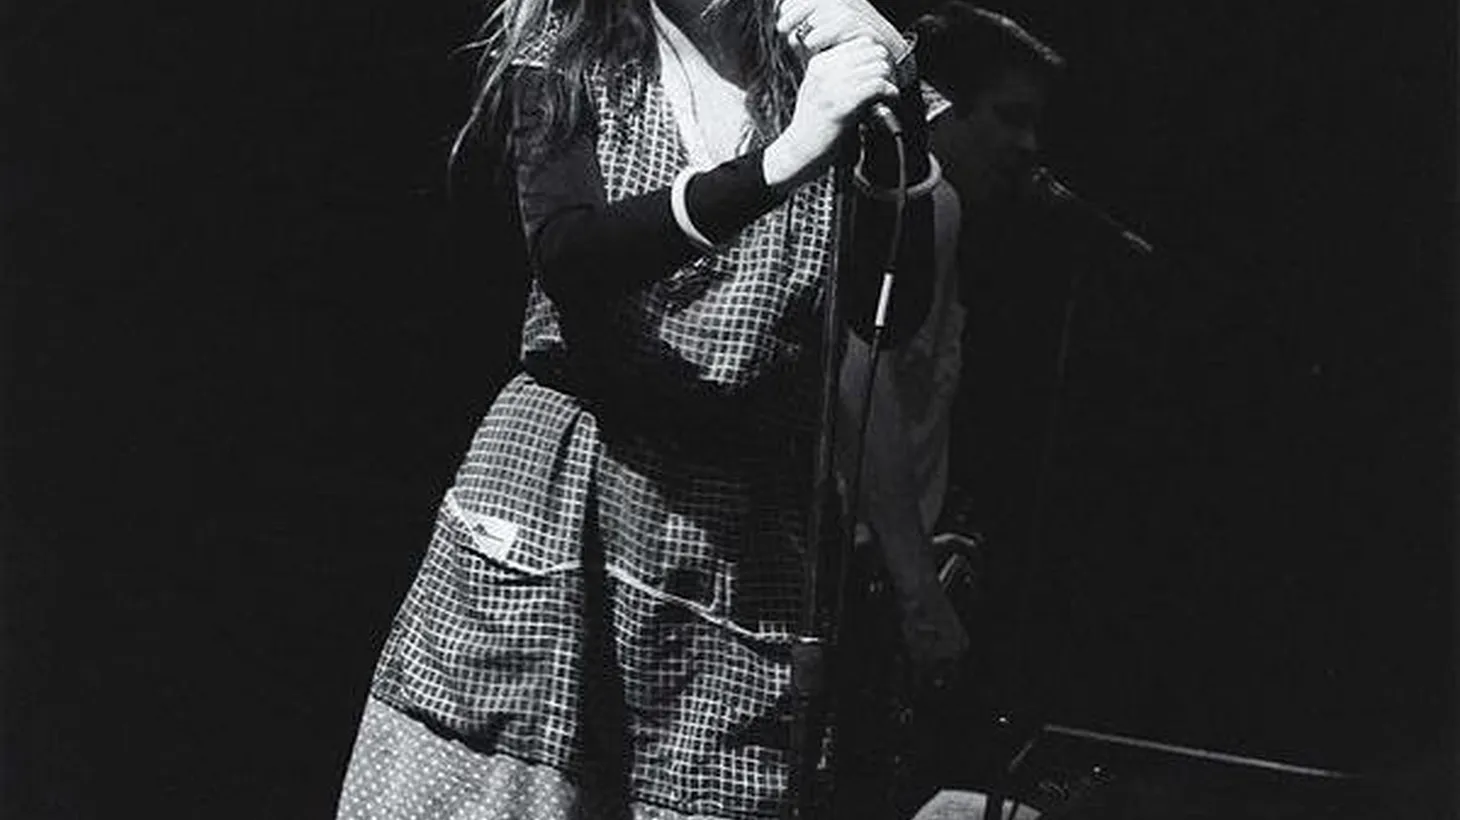 L.A. punk rocker and founding member of X, Exene Cervenka, returns to KCRW armed a batch up poetic songs from her new solo project on Morning Becomes Eclectic at 11:15am.